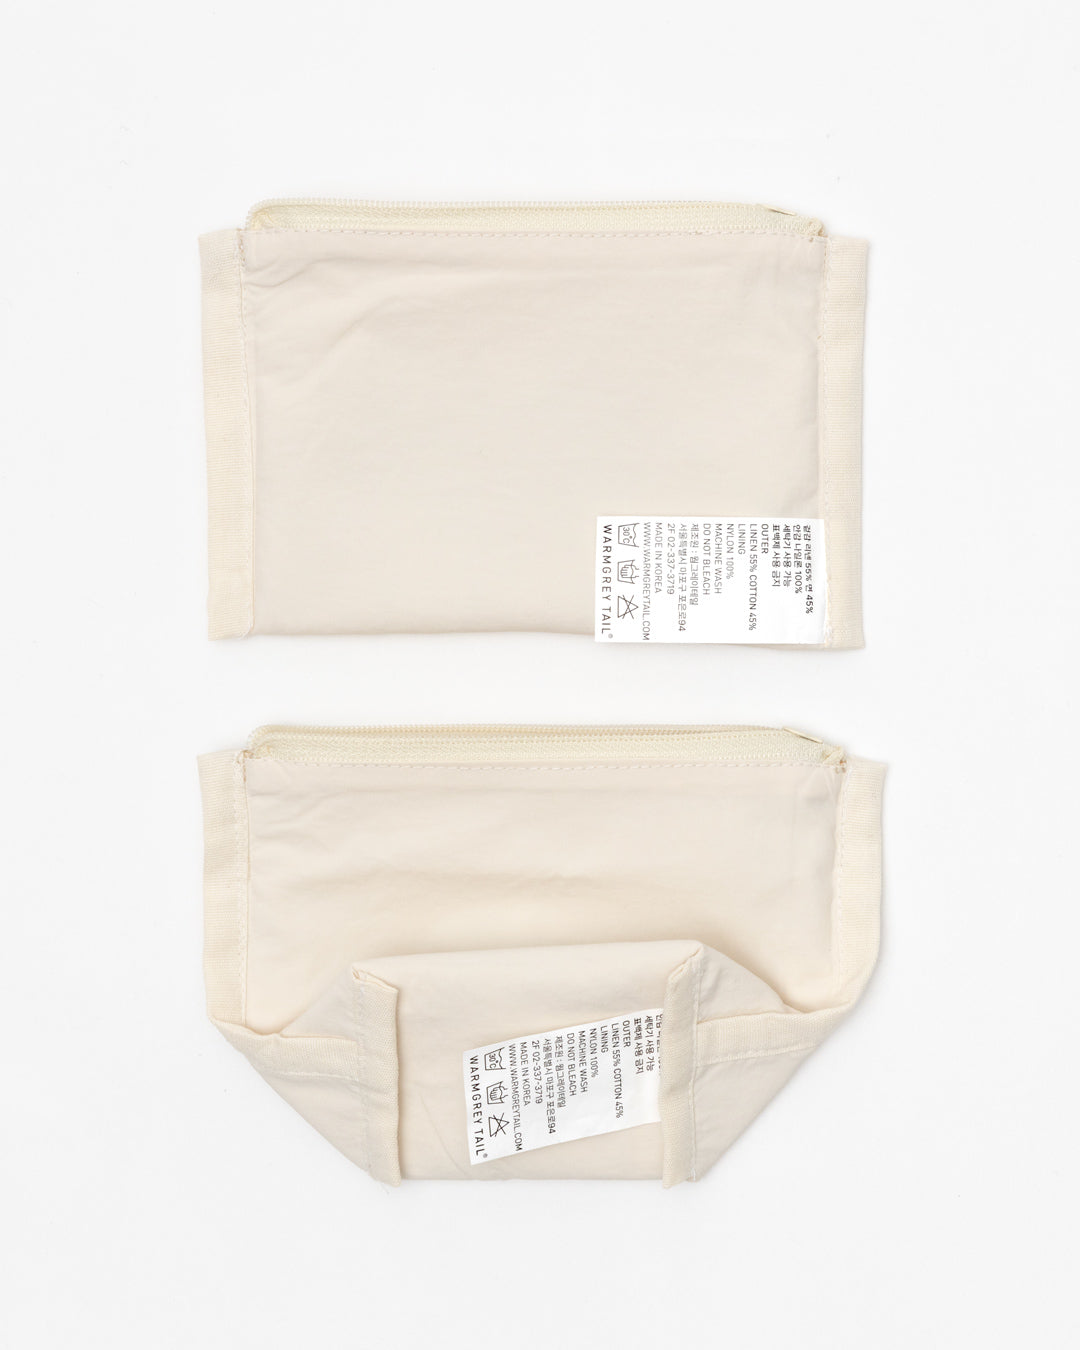 CAT COMING LABEL FLAT POUCH - CAMEL (2size)